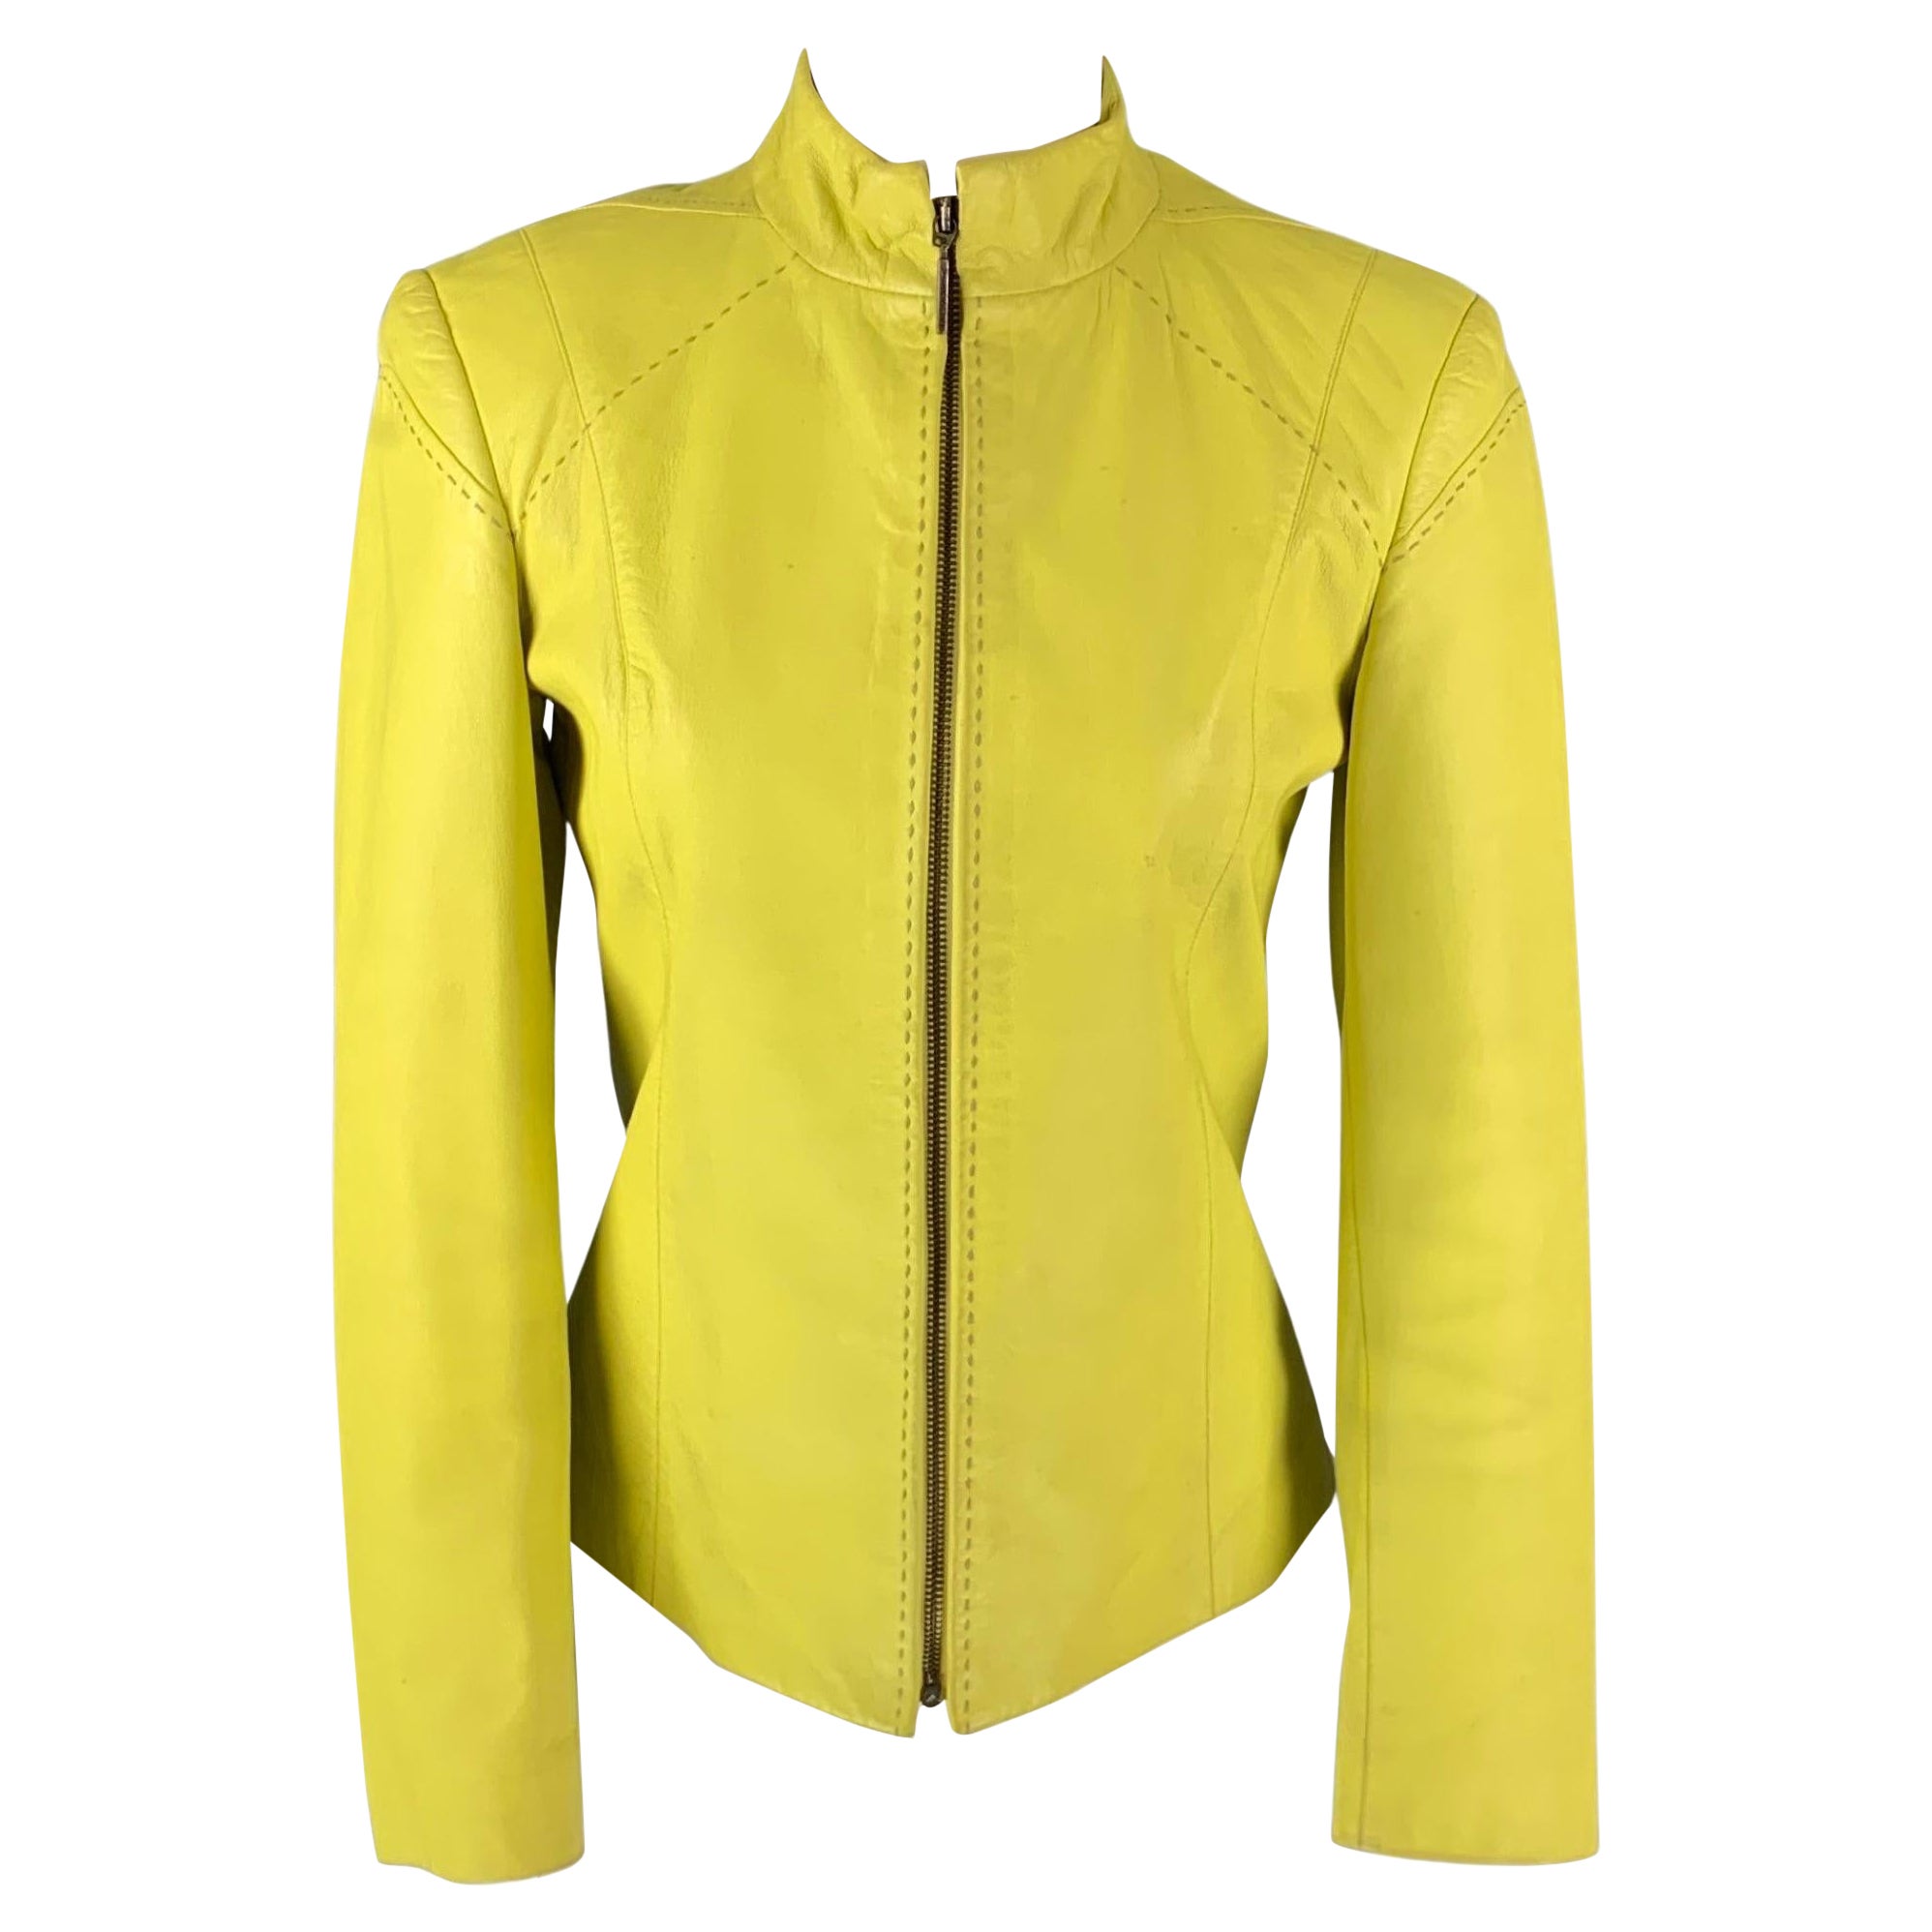 Vintage VERSUS by GIANNI VERSACE Size 4 Yellow Leather Jacket at 1stDibs